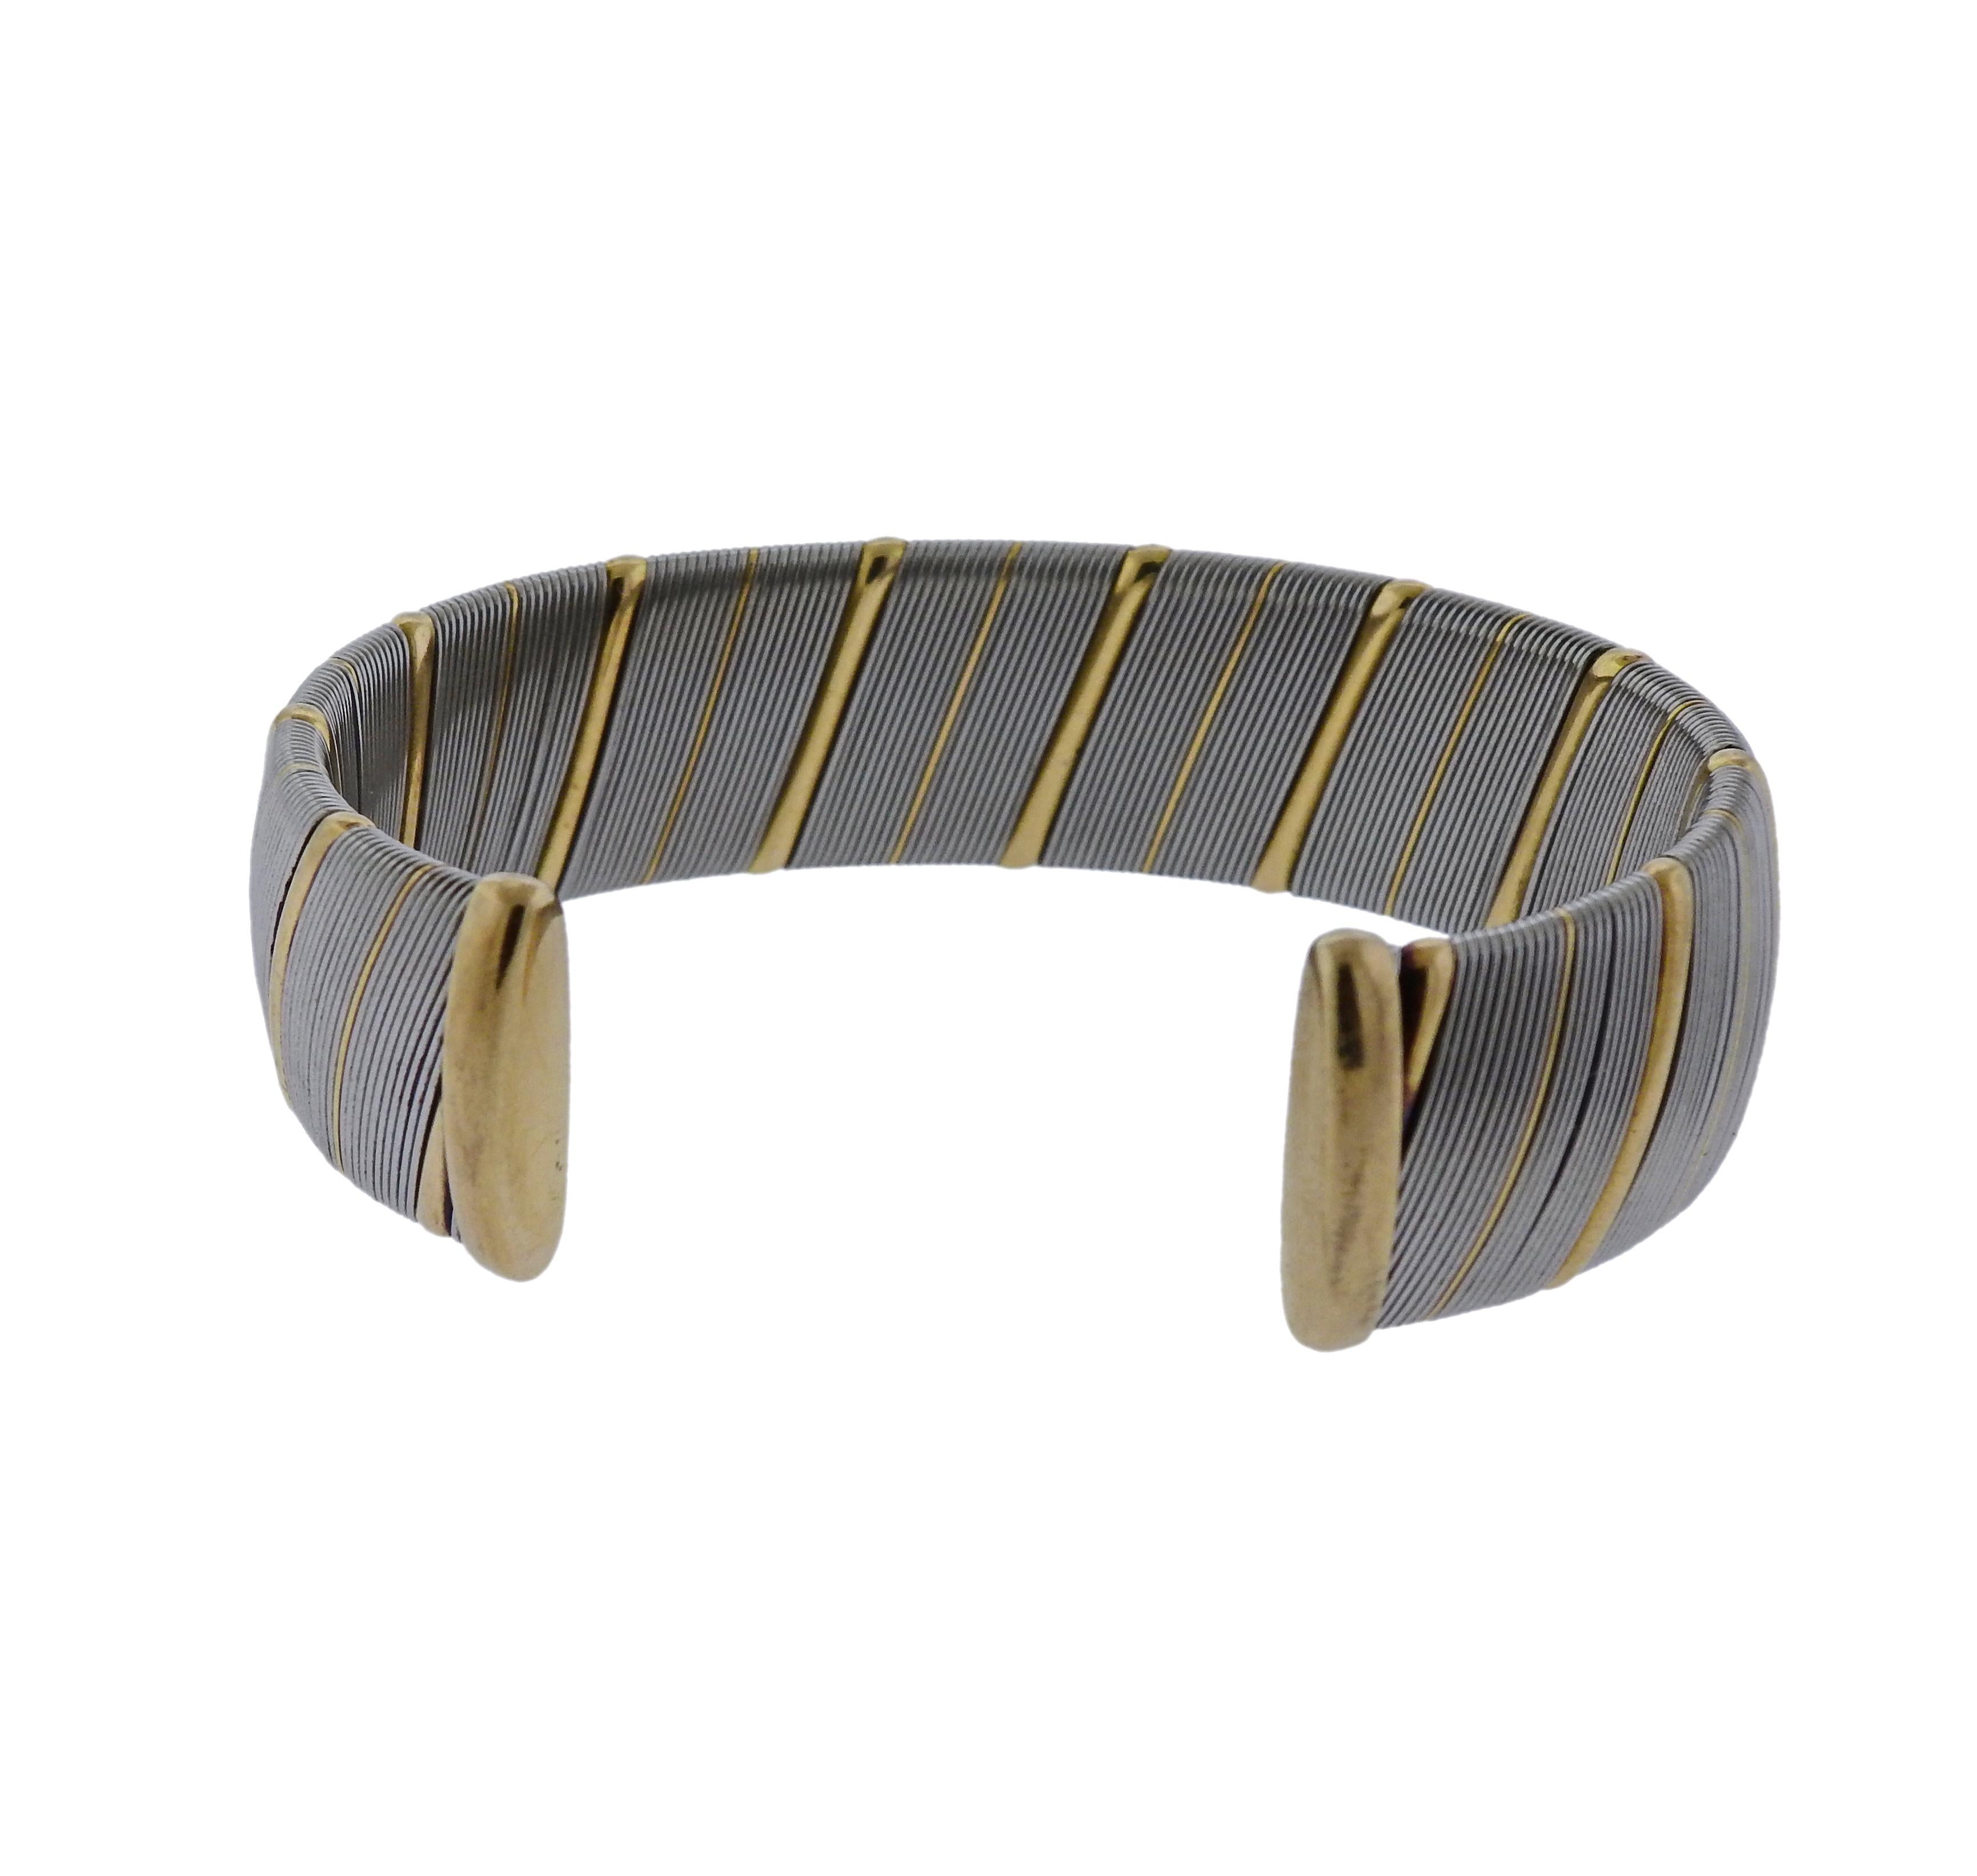 Stainless steel and 18k yellow gold bracelet crafted by Cartier. Bracelet will fit approx. 7.5